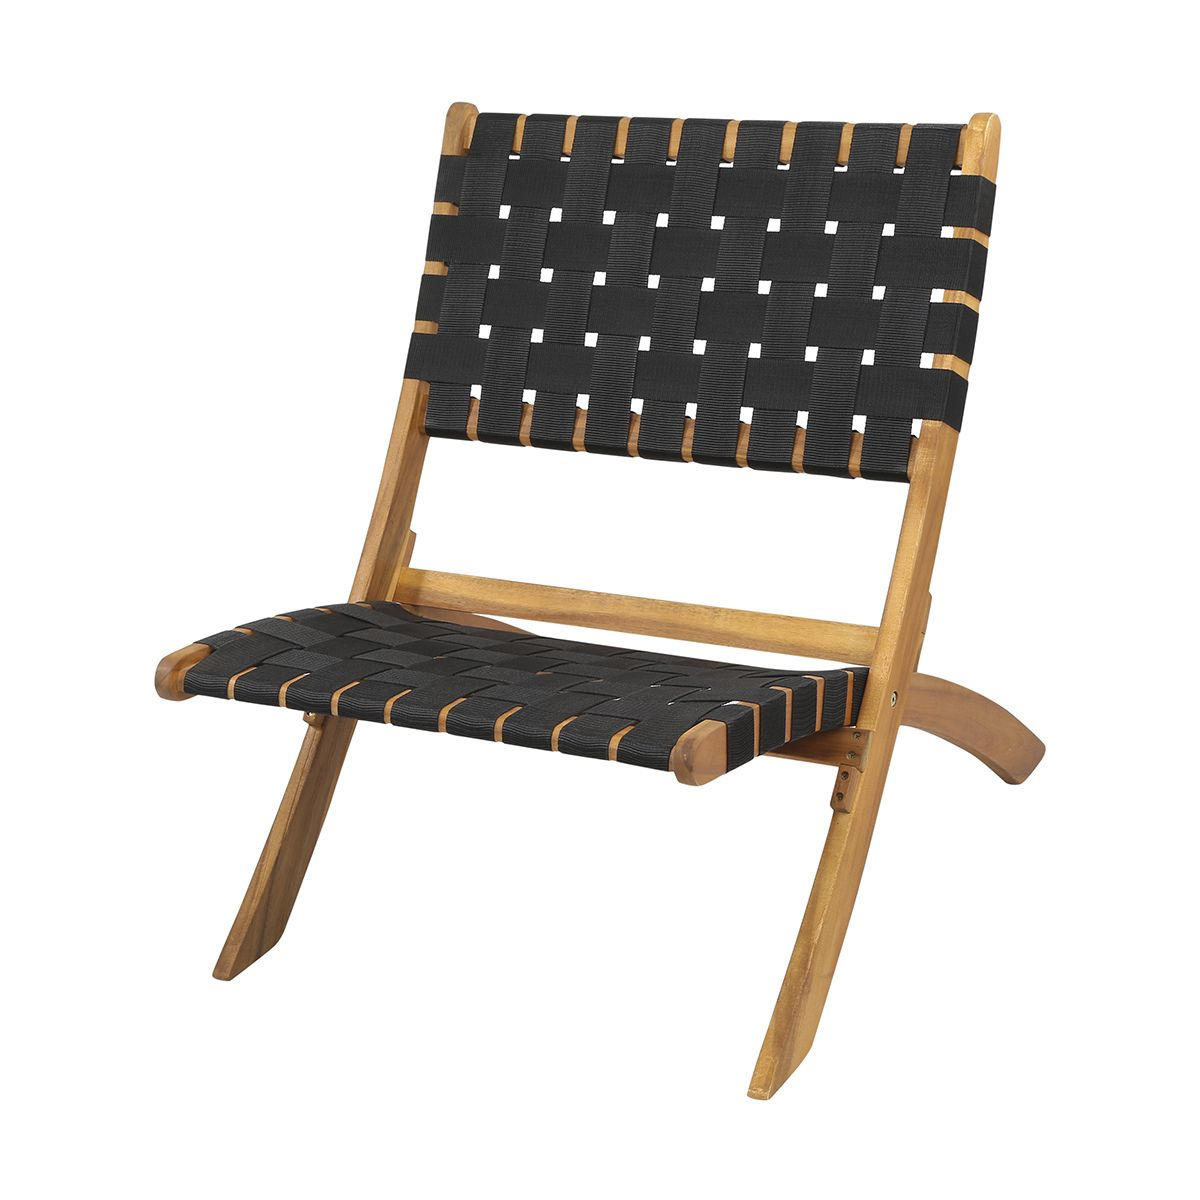 Woven Chair Kmart Woven Chair Outdoor Furniture Sets with regard to measurements 1200 X 1200